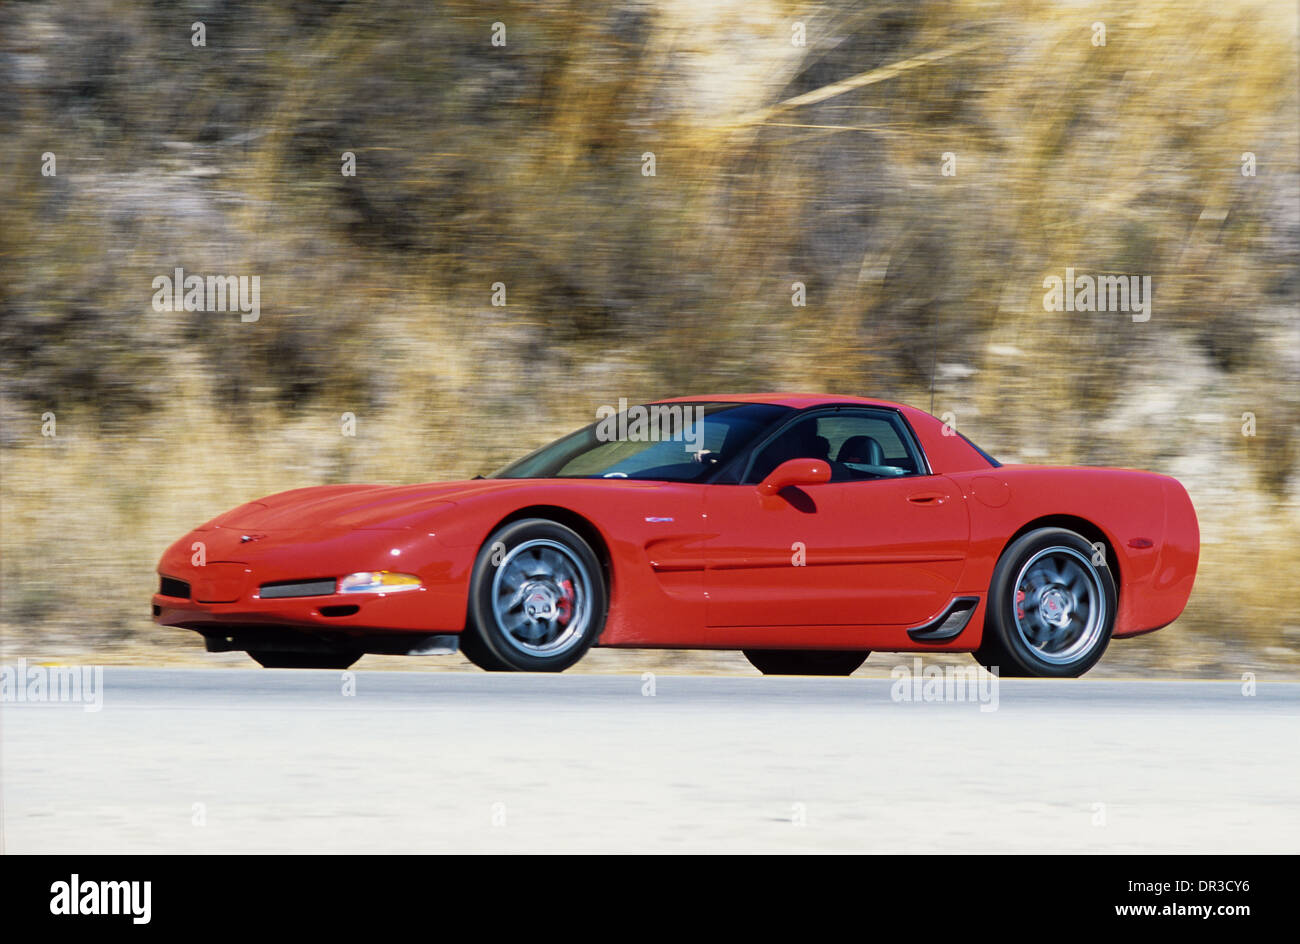 Chevrolet Corvette C5 - Z06 Model 2001 - Red - front and side view Stock Photo